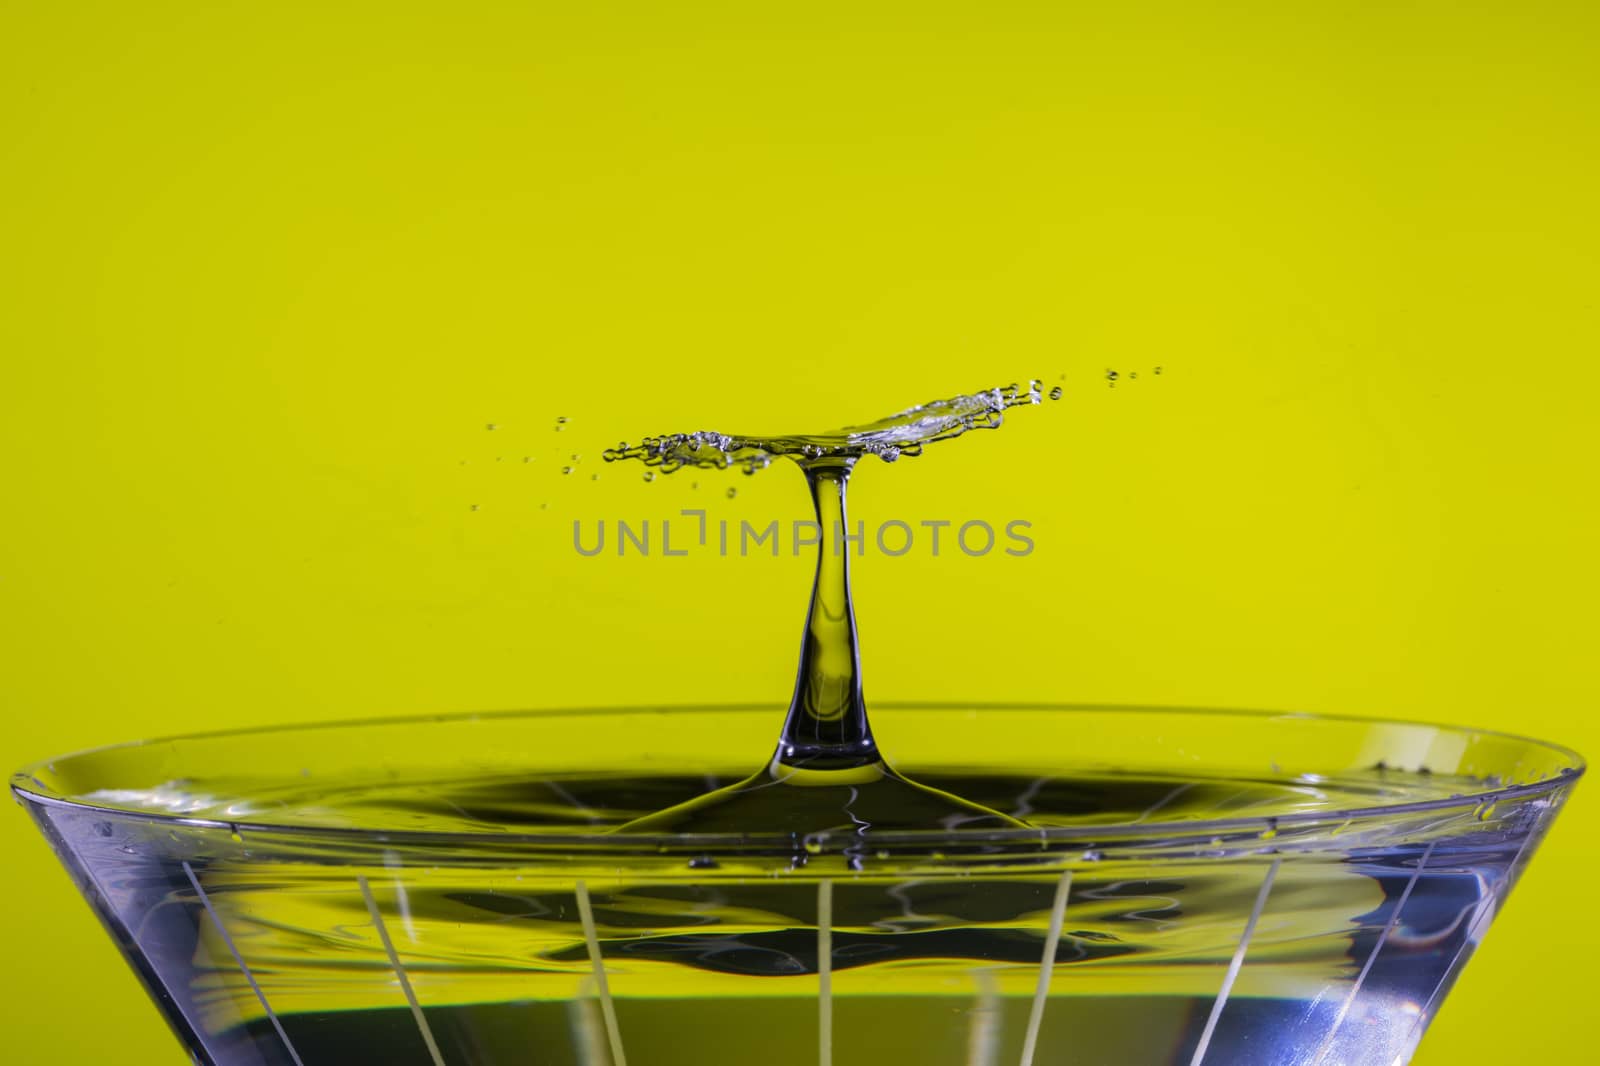 Falling Drops Collide over Martini Glass by CharlieFloyd